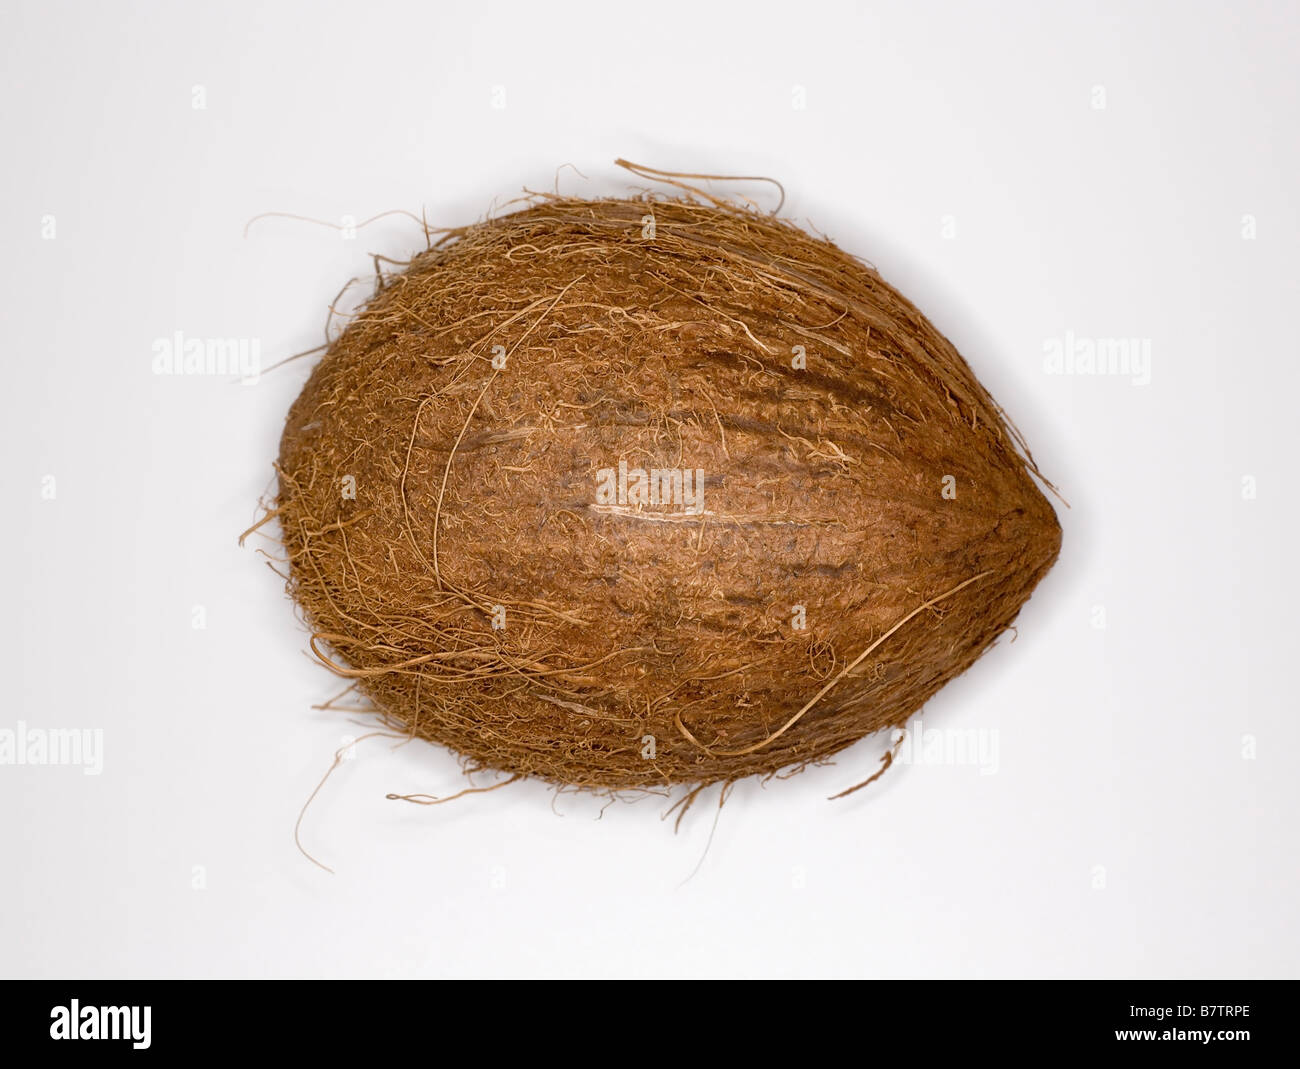 Coconut against white background Stock Photo